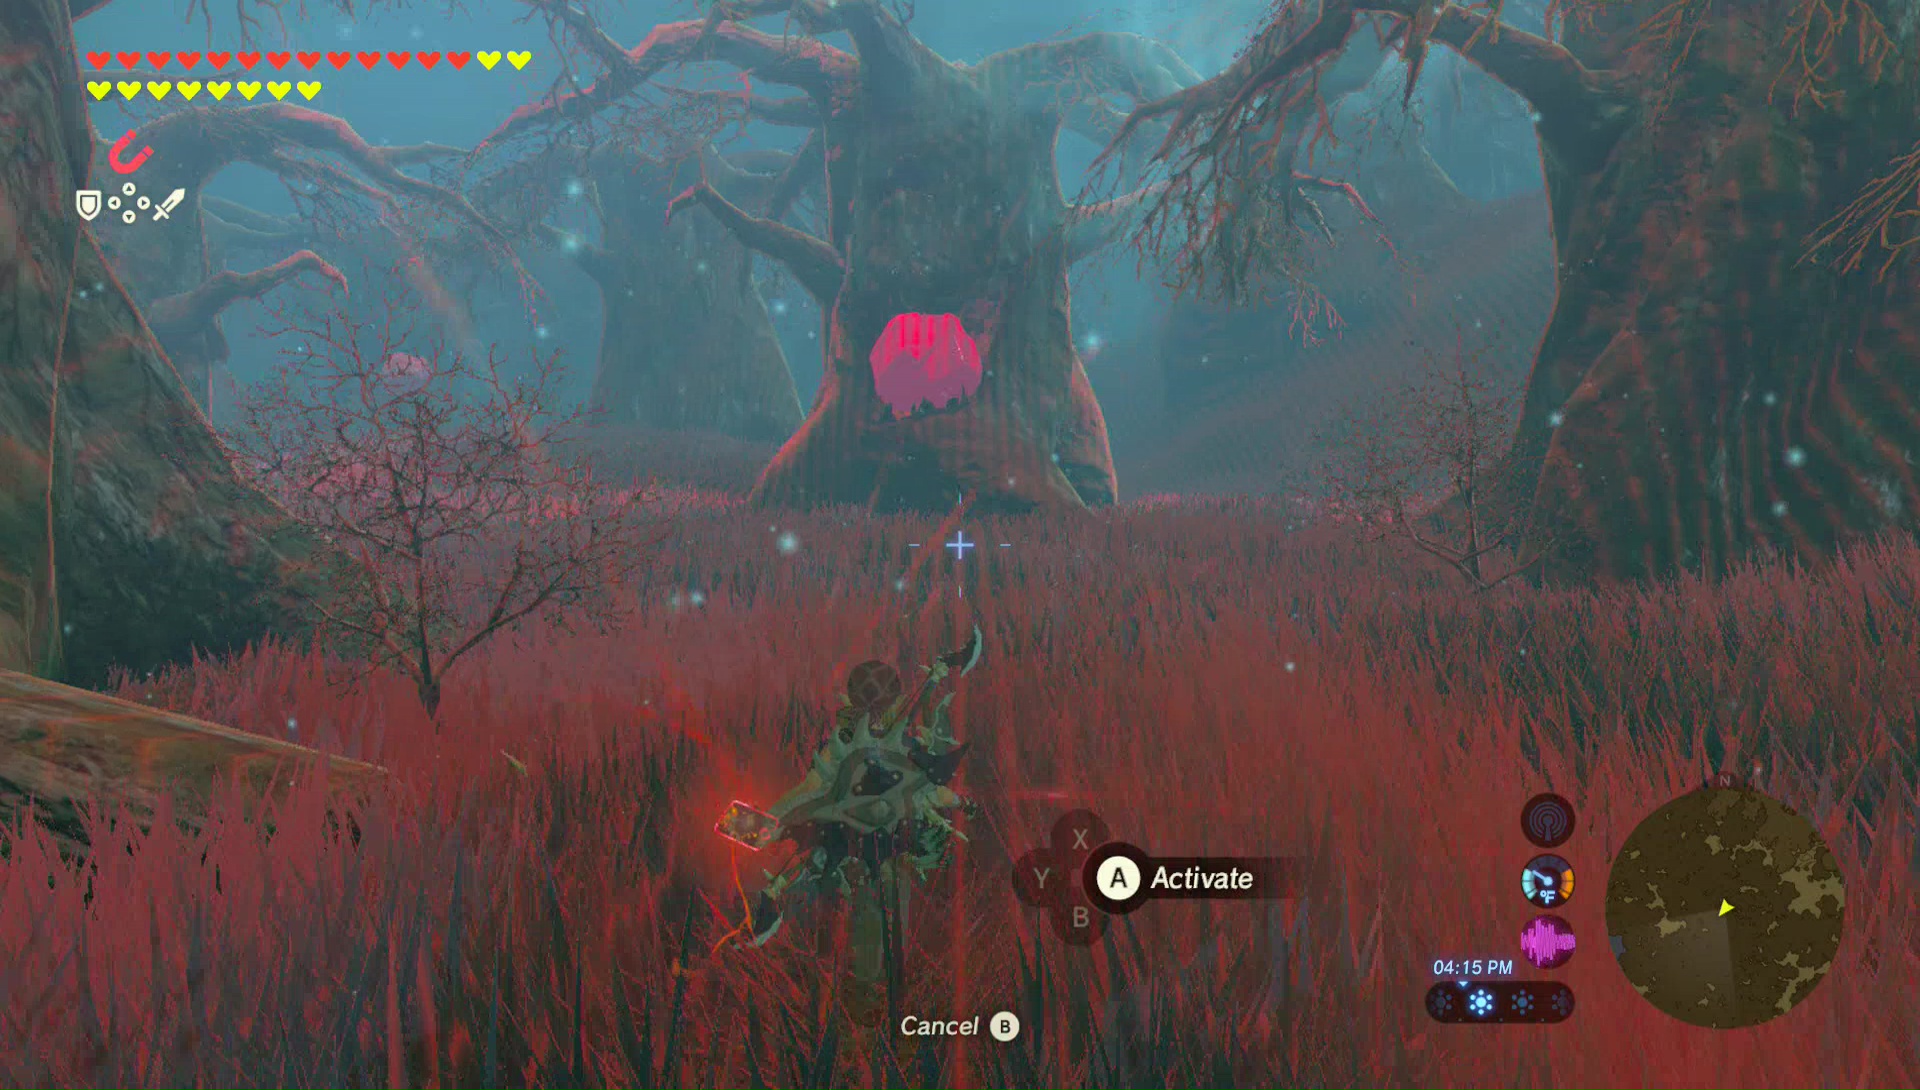 How To Complete The Trial Of Second Sight Shrine Quest In BotW